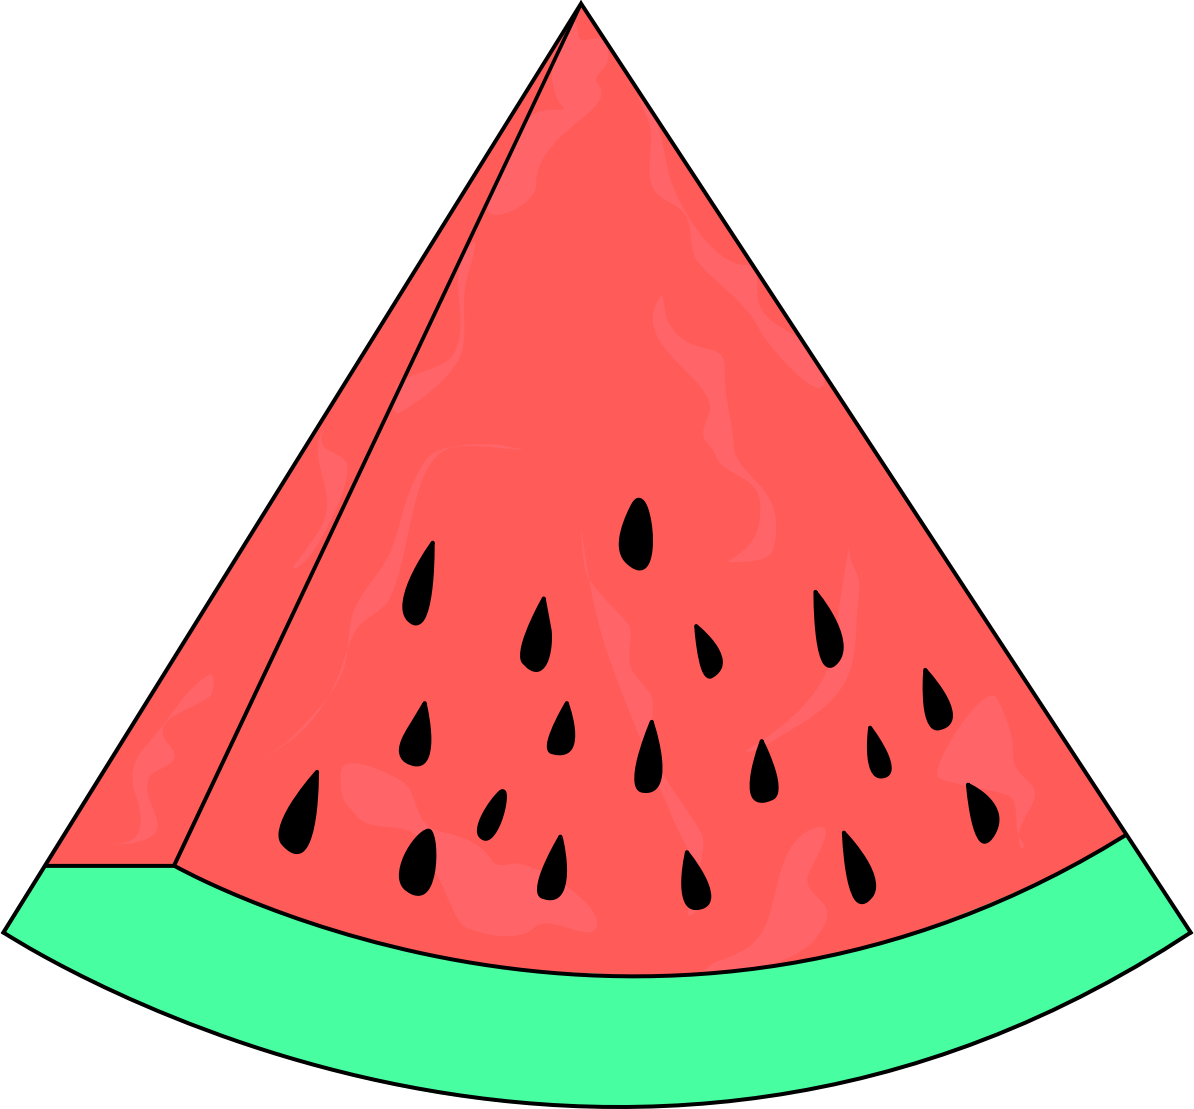 Popular Items For Watermelon On Image Clipart